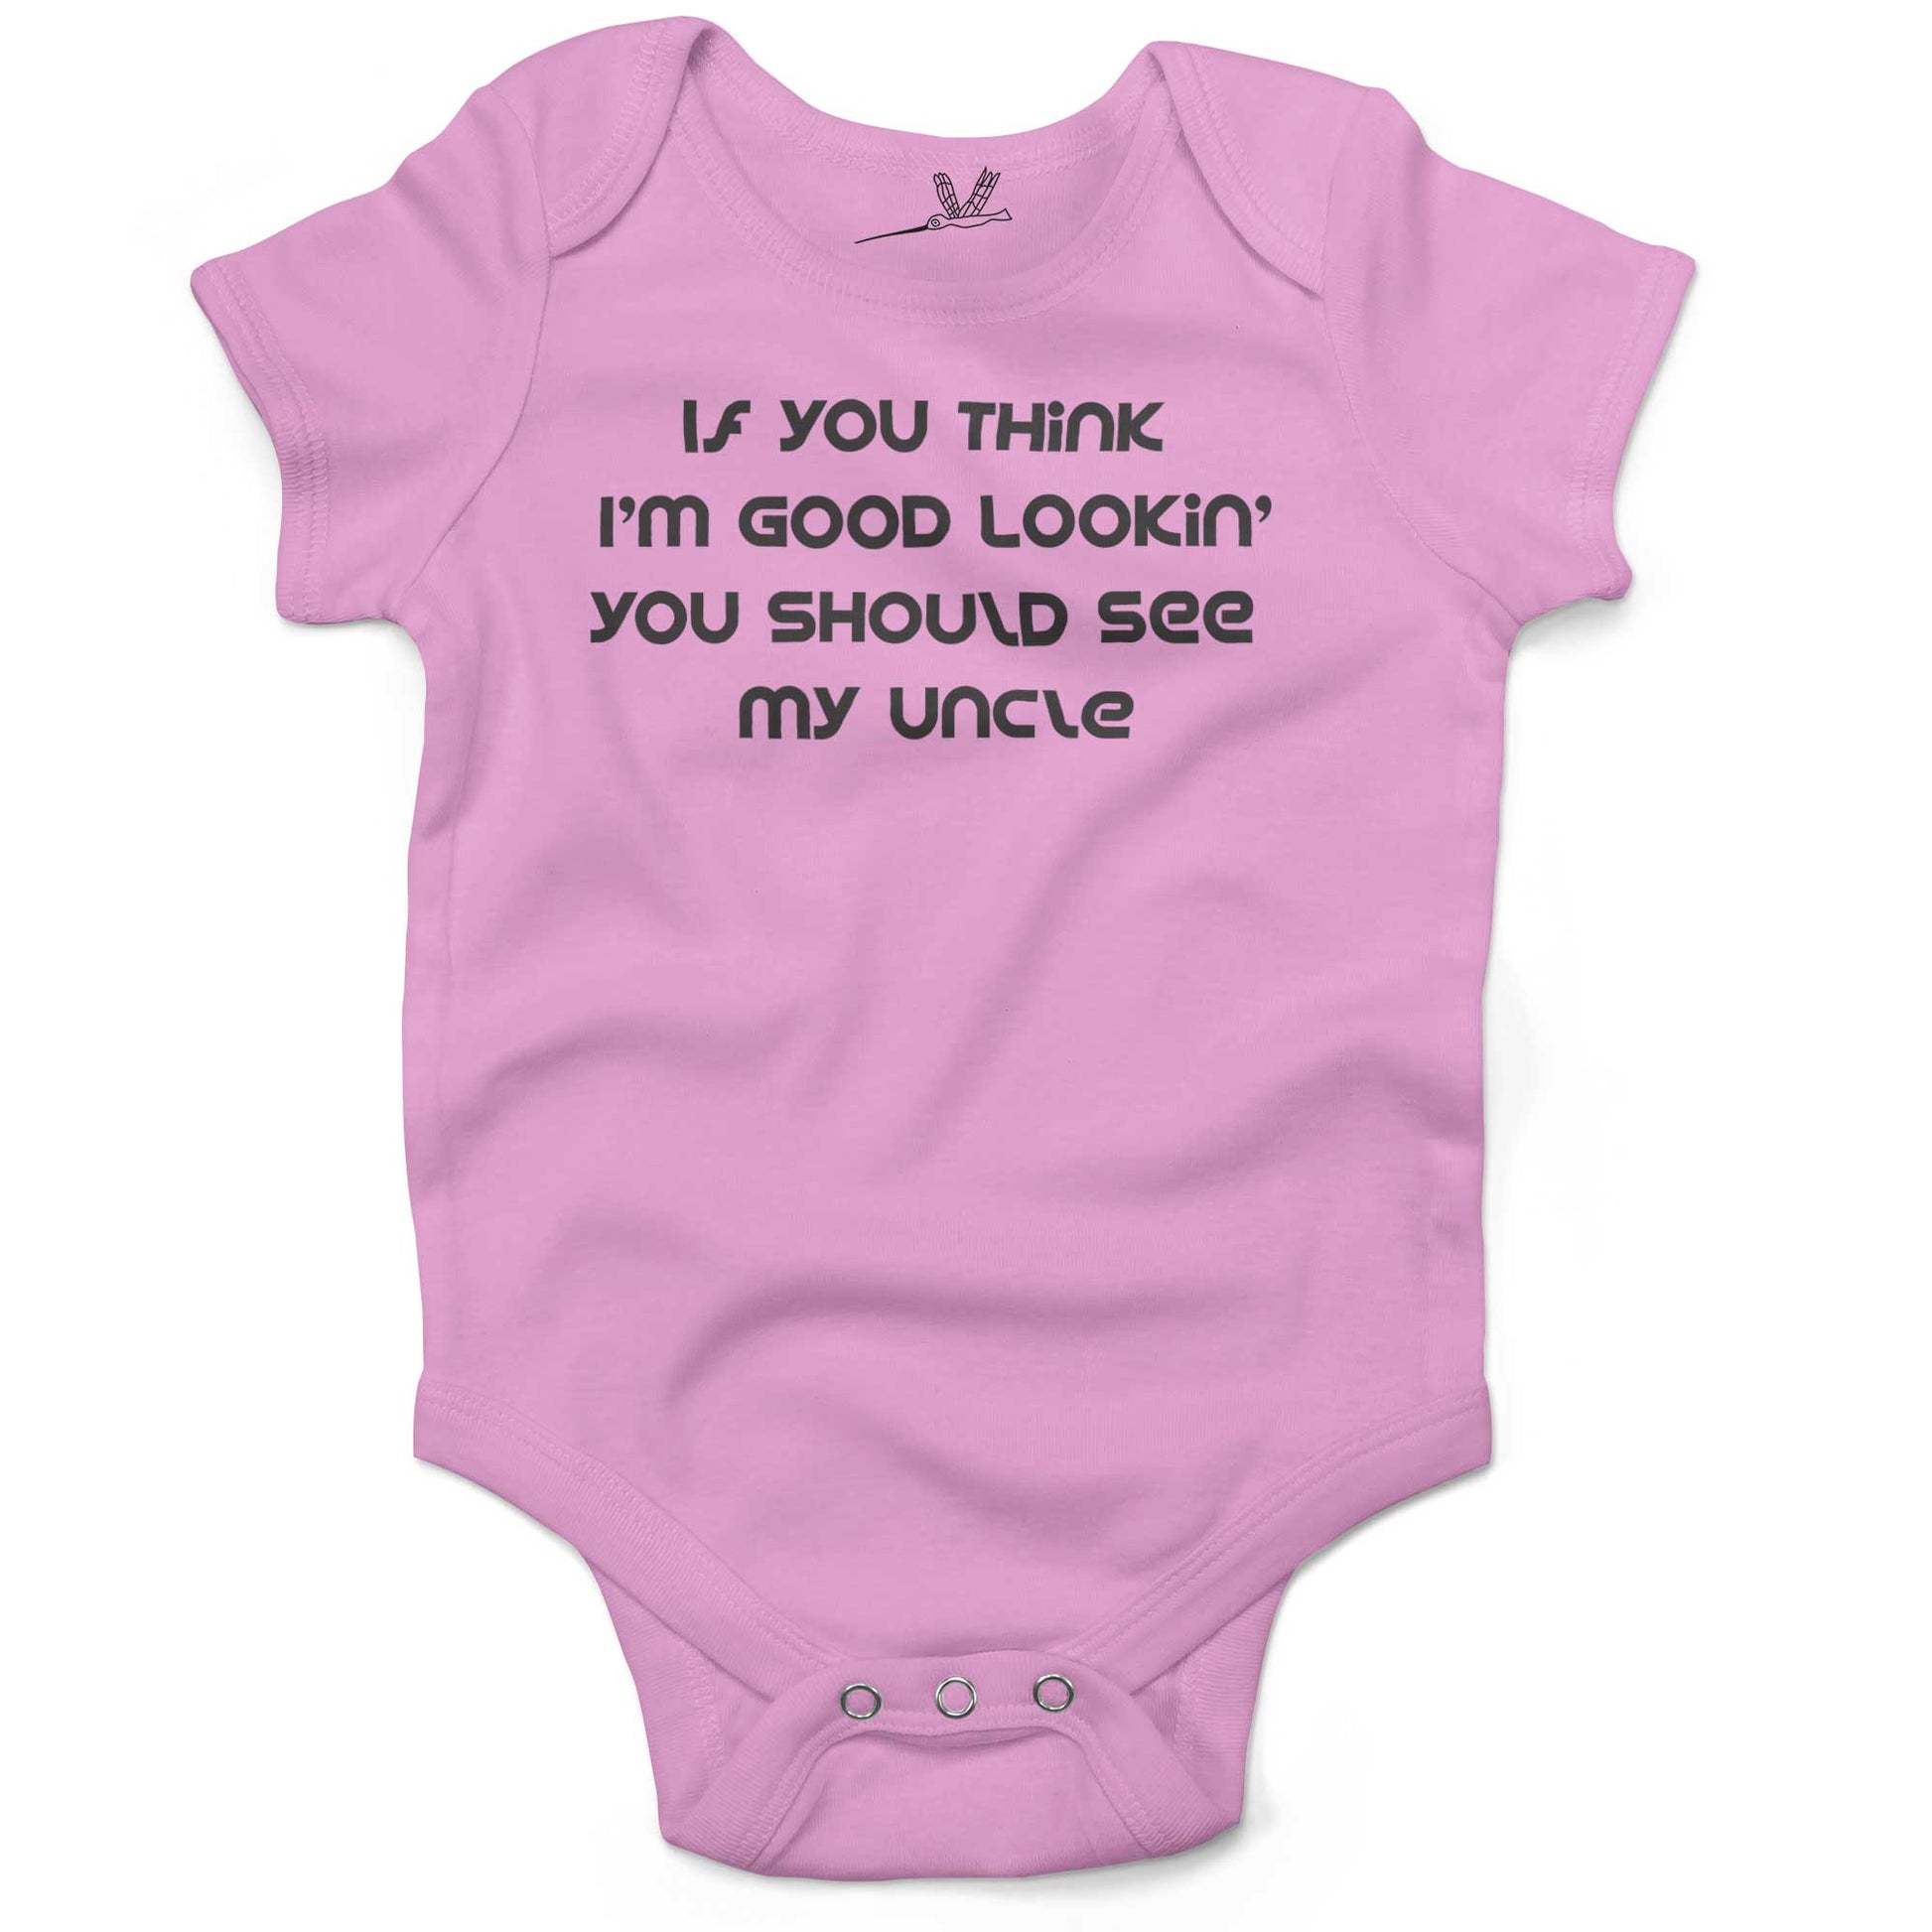 If You Think I'm Good Lookin' You Should See My Uncle Infant Bodysuit or Raglan Tee-Organic Pink-3-6 months